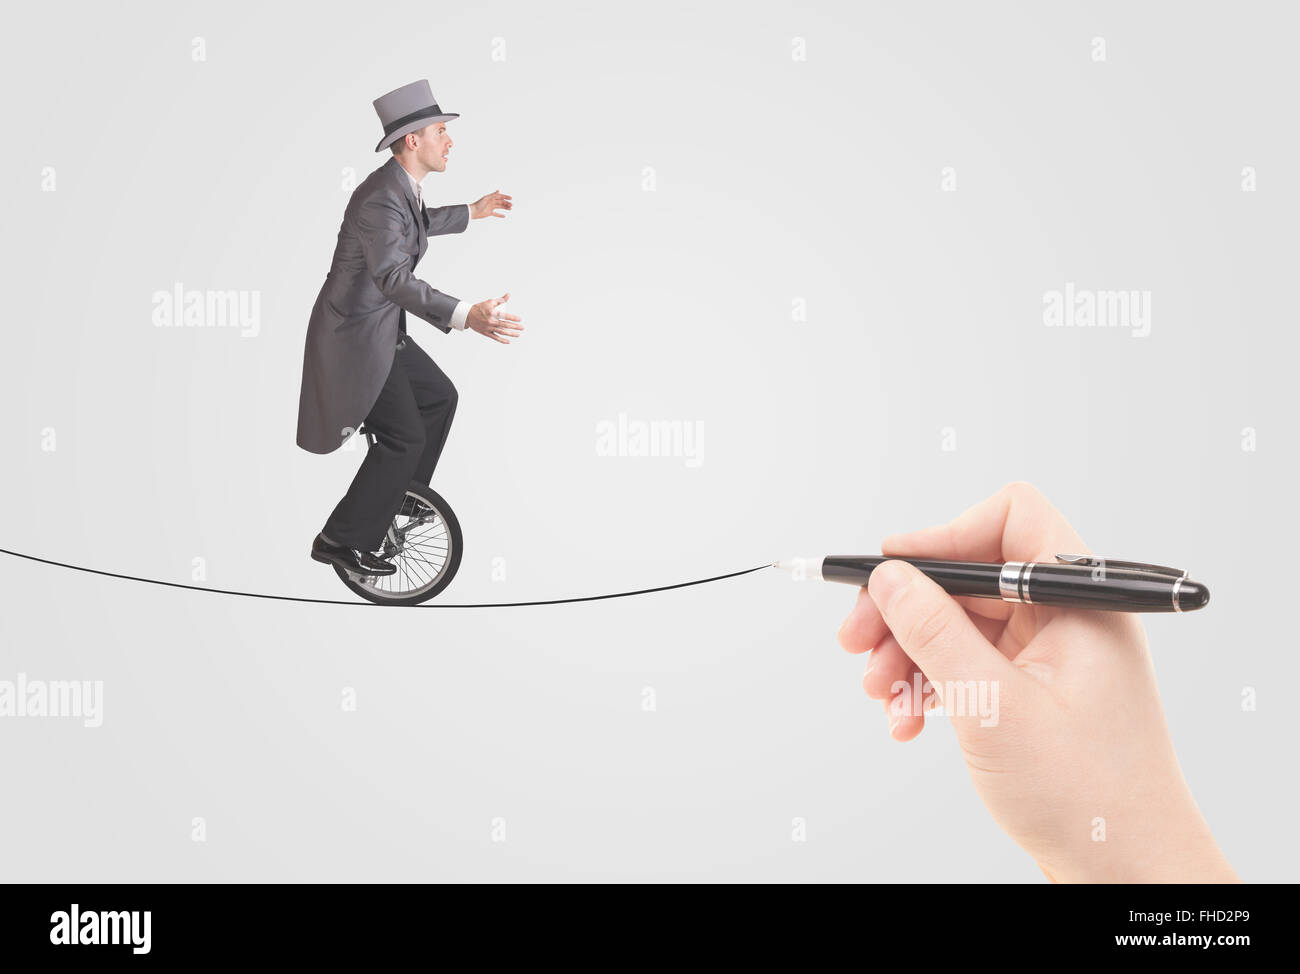 Businessman riding monocycle on a rope drawn by hand Stock Photo